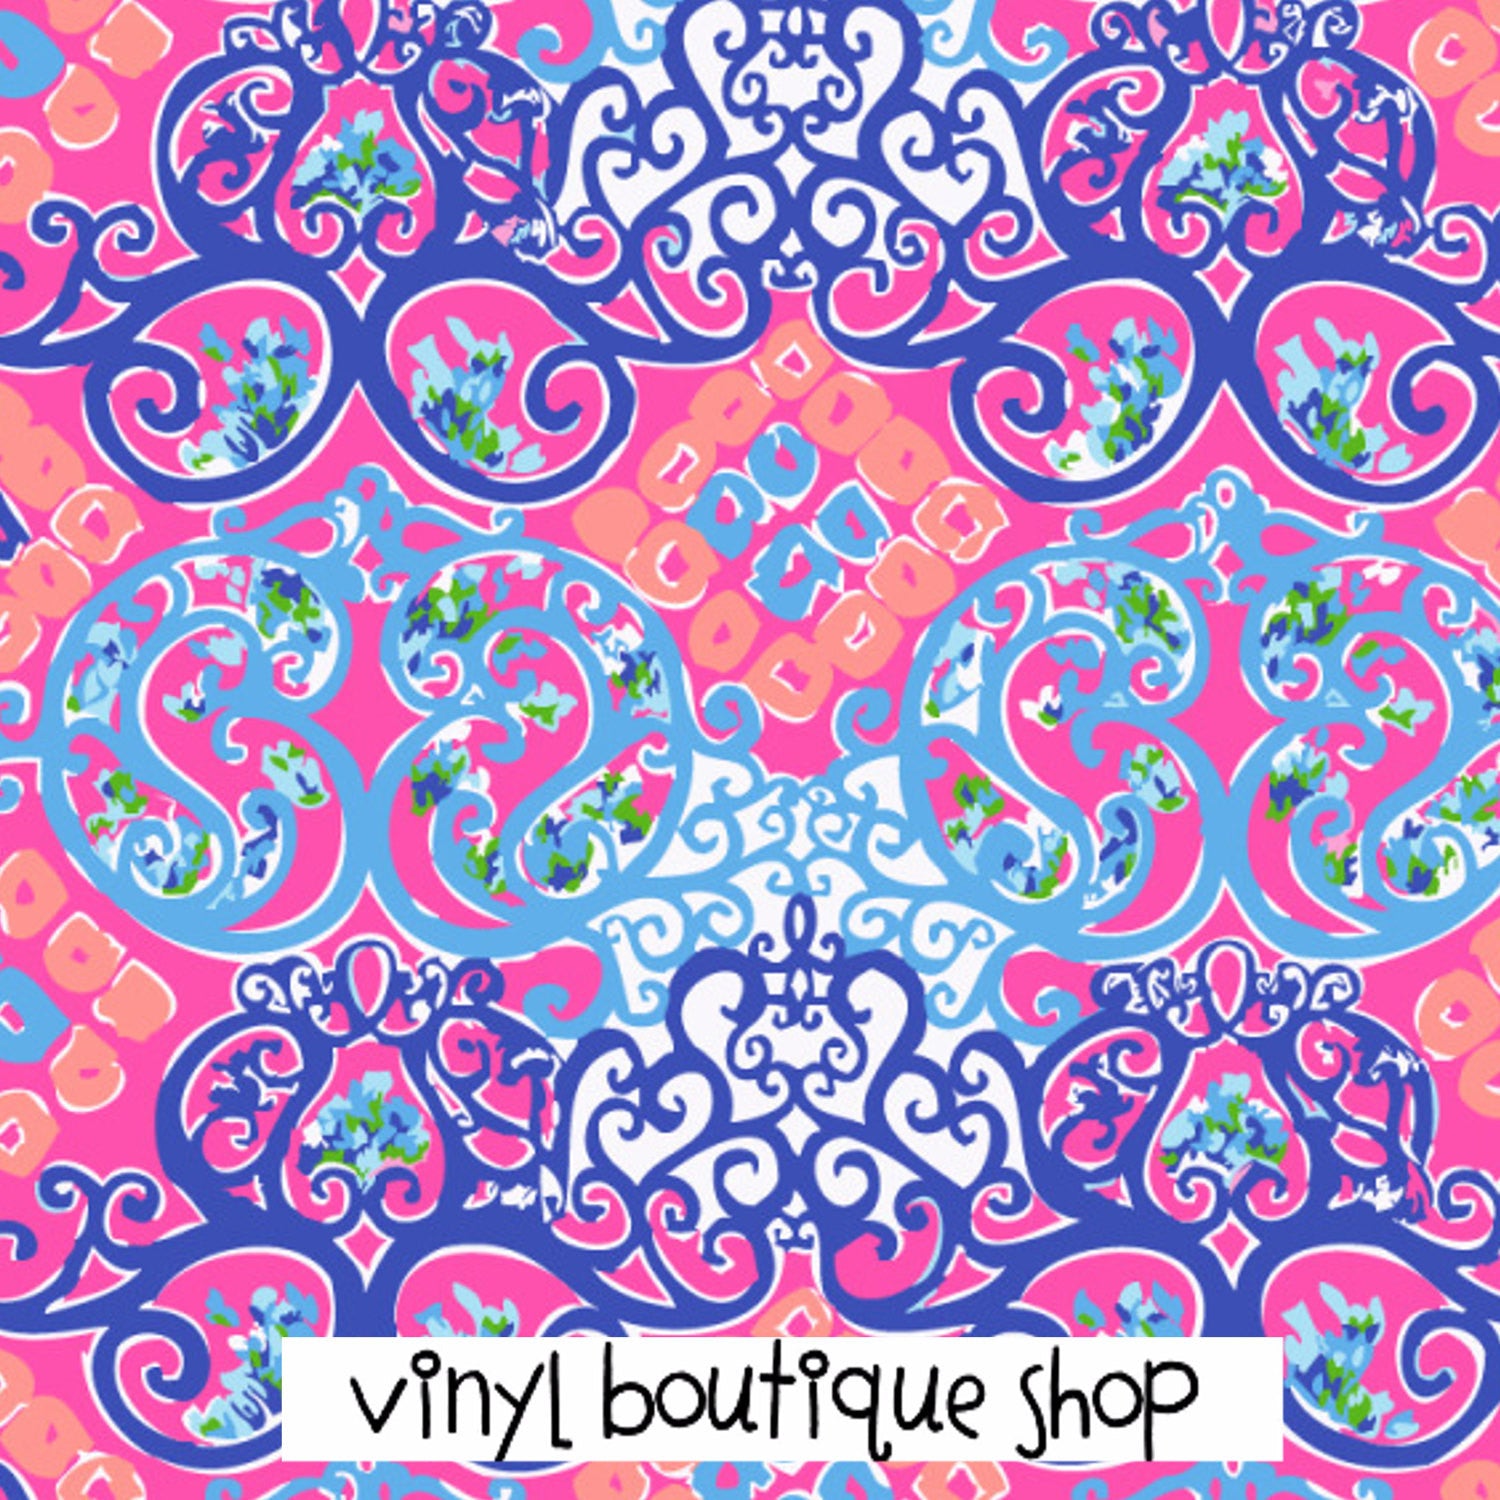 Purple Lilly Inspired Printed Patterned Craft Vinyl - Vinyl Boutique Shop